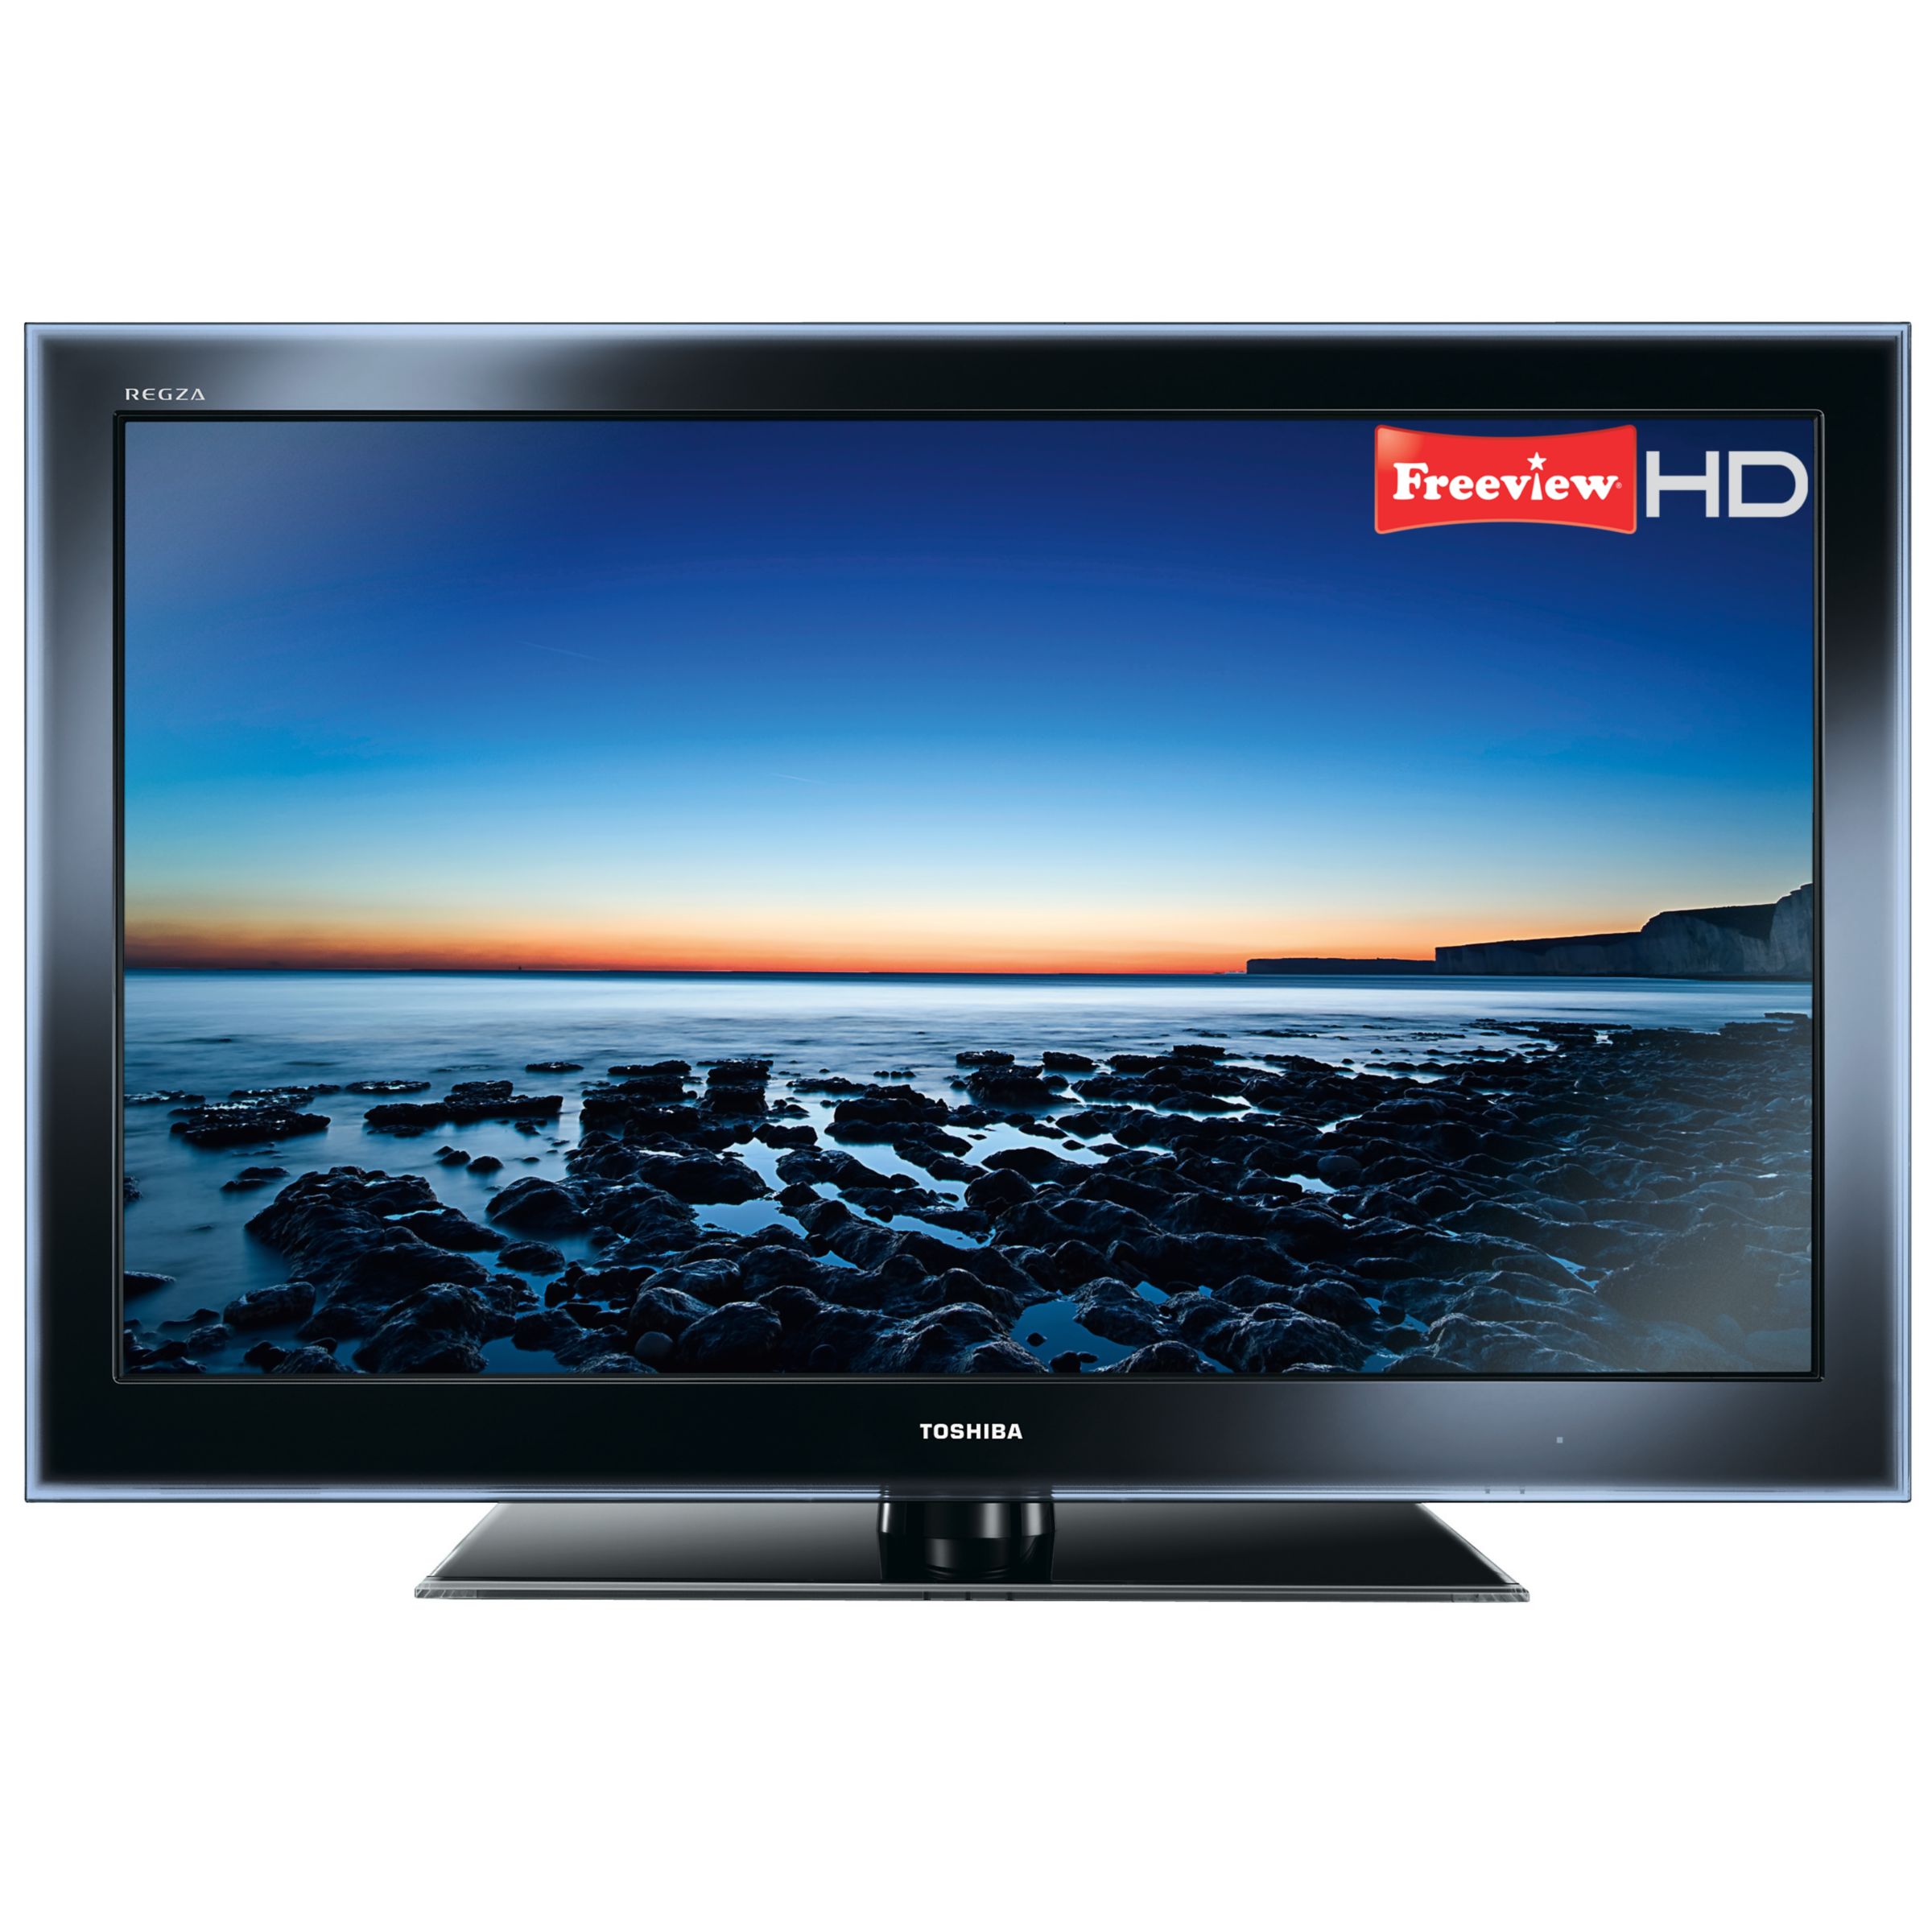 Toshiba Regza 40SL753 LED HD 1080p TV, 40", Freeview HD with FREE Blu-ray Disc Player at John Lewis